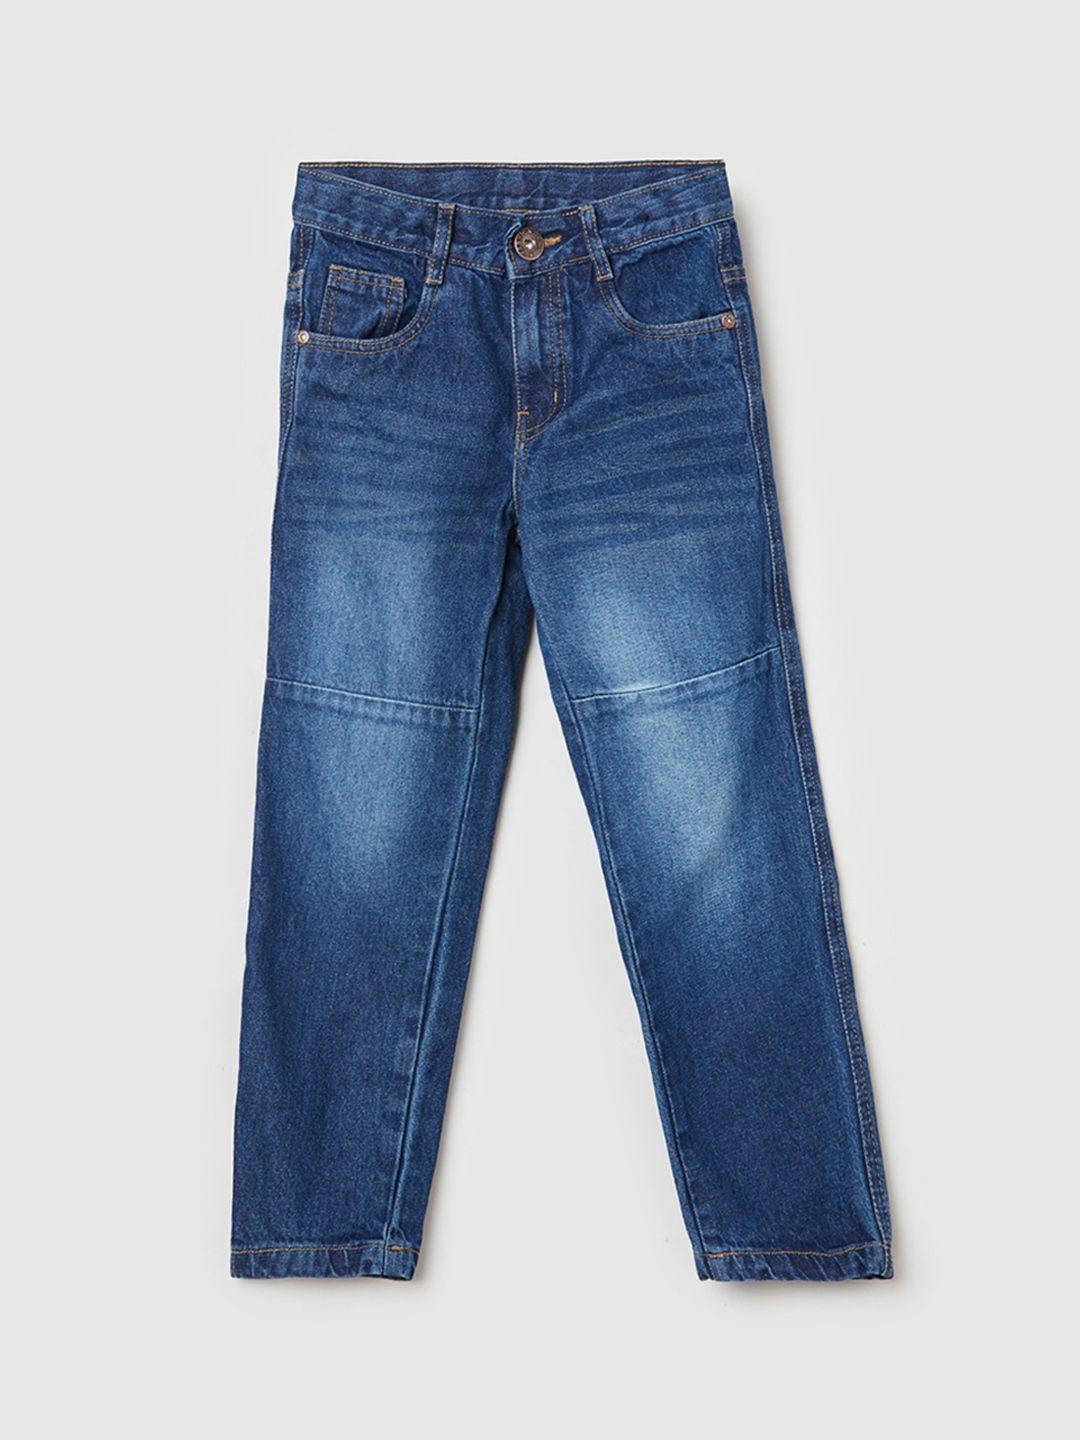 max-boys-mid-rise-light-fade-jeans